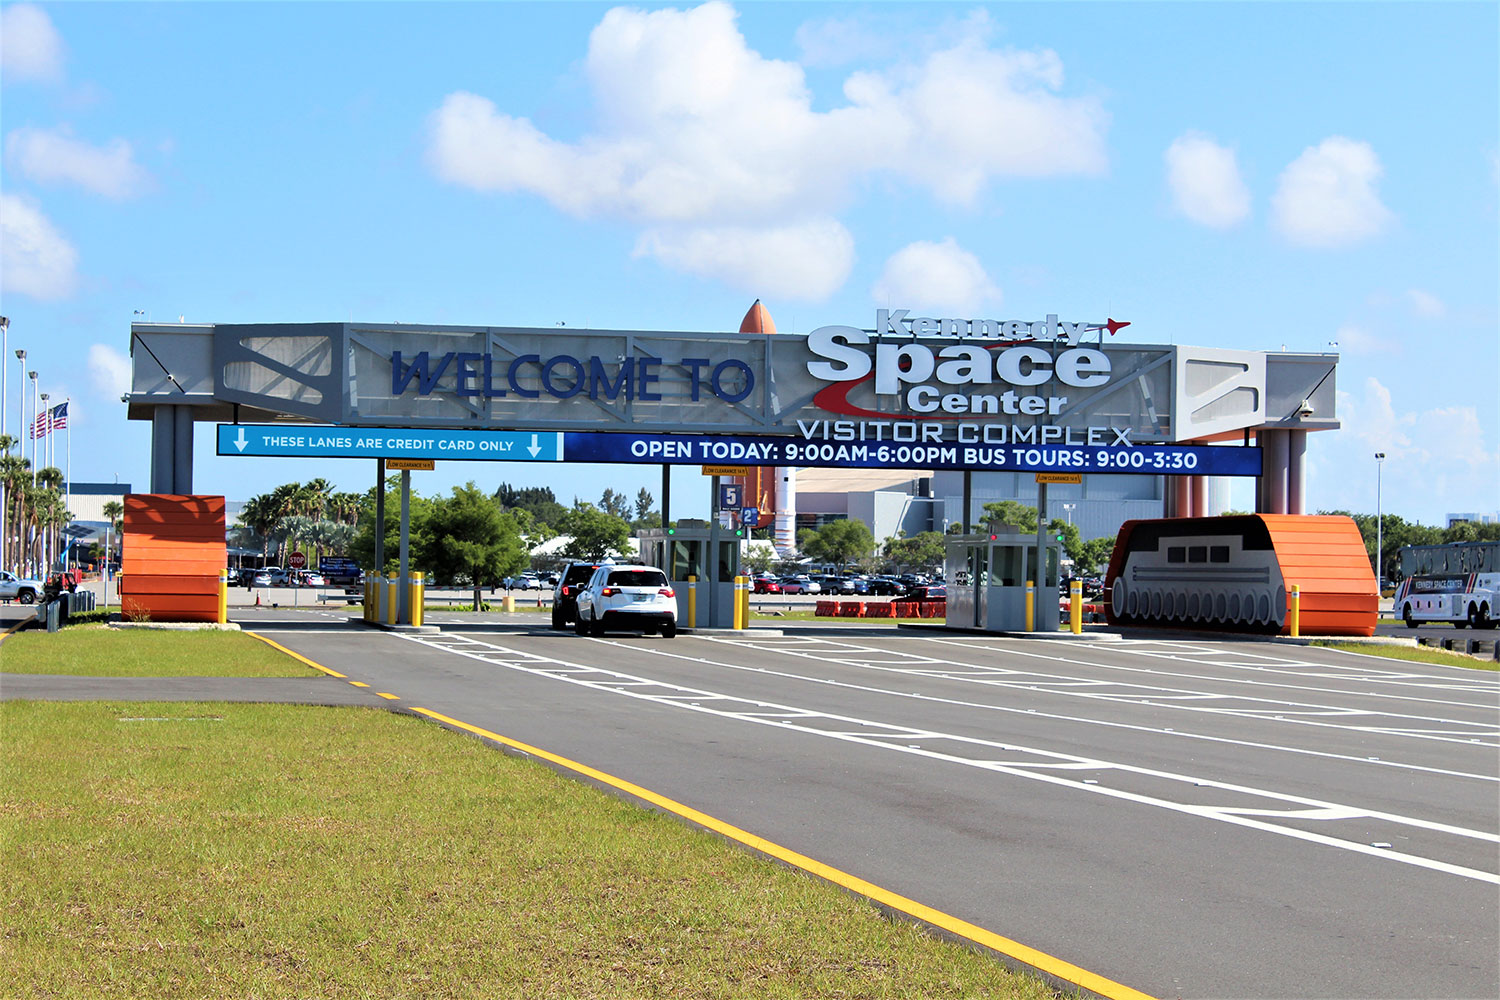 Kennedy Space Center parking lot in Florida